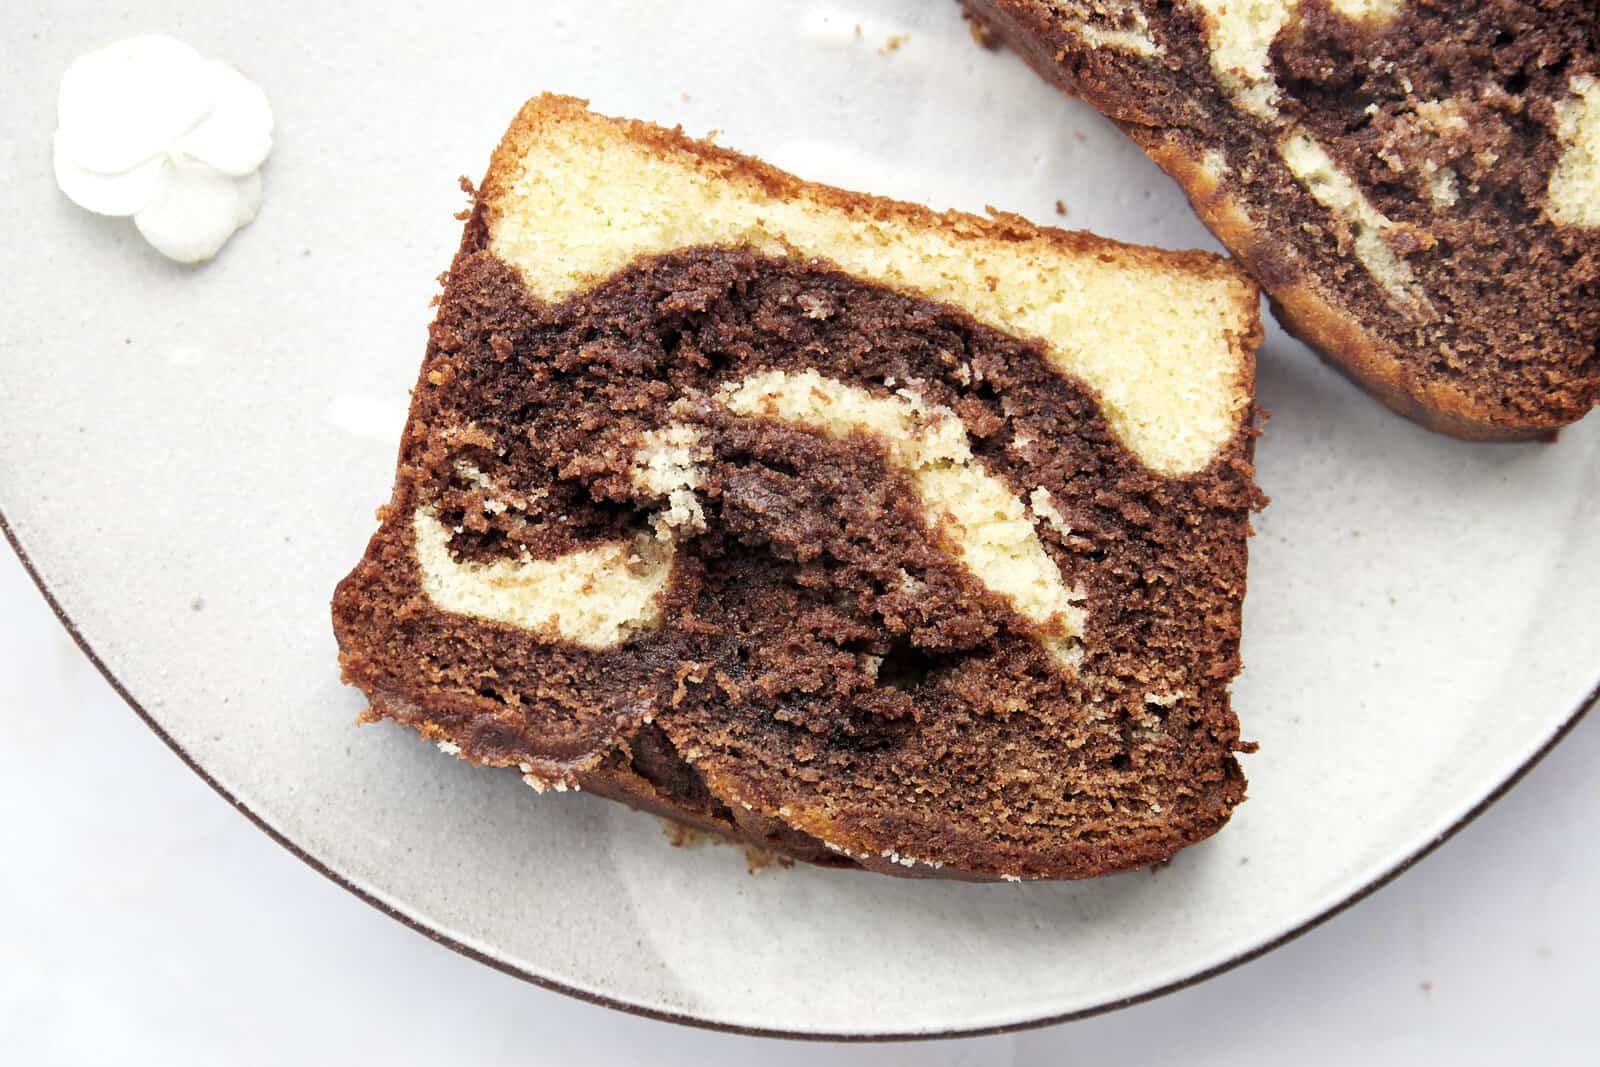 A slice of marble cake on a plate.